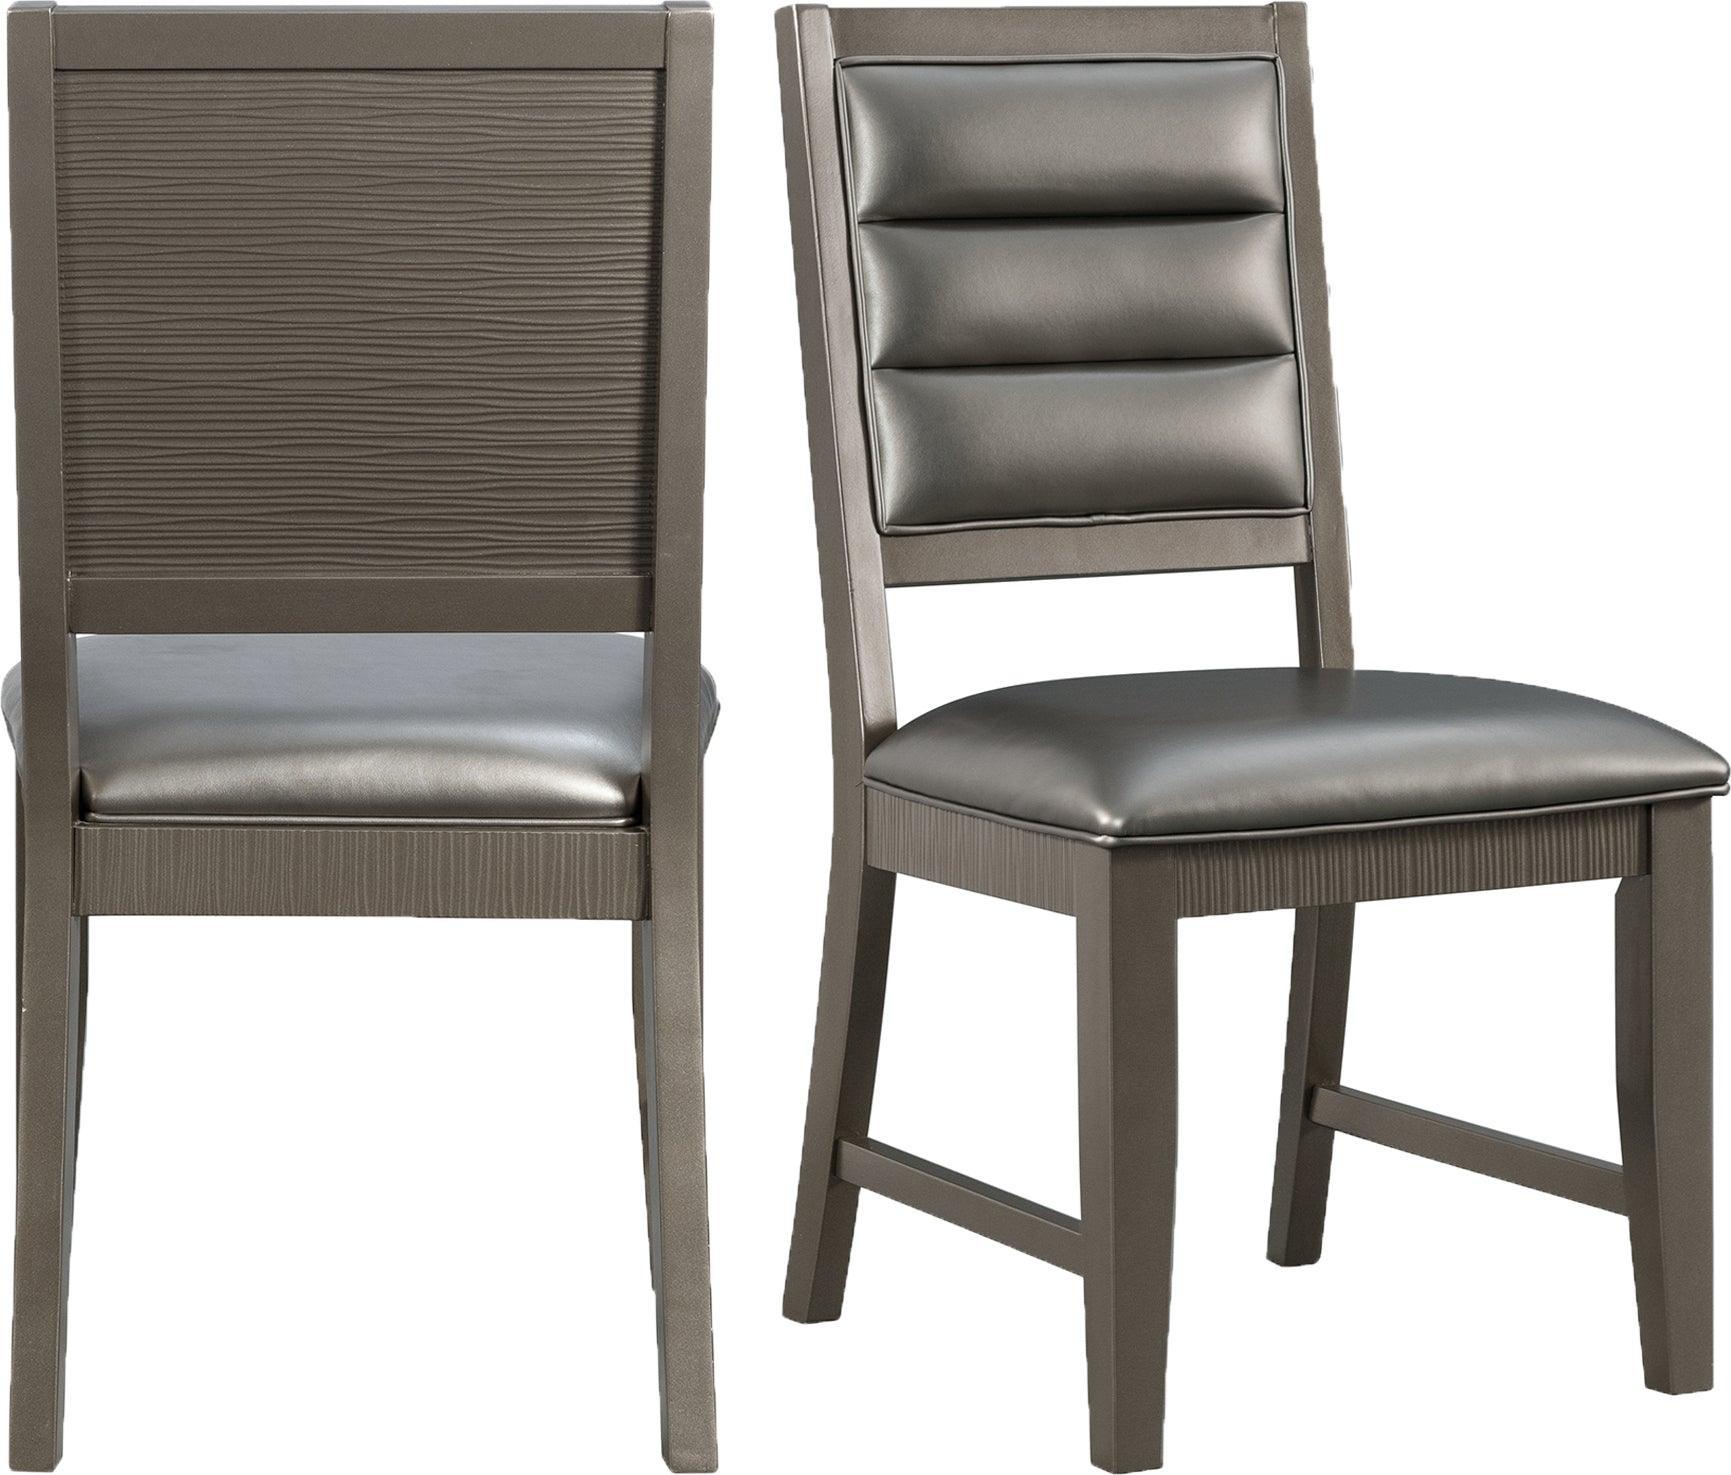 Elements Dining Chairs - Aria Standard Height Side Chair Set (Set of 2)